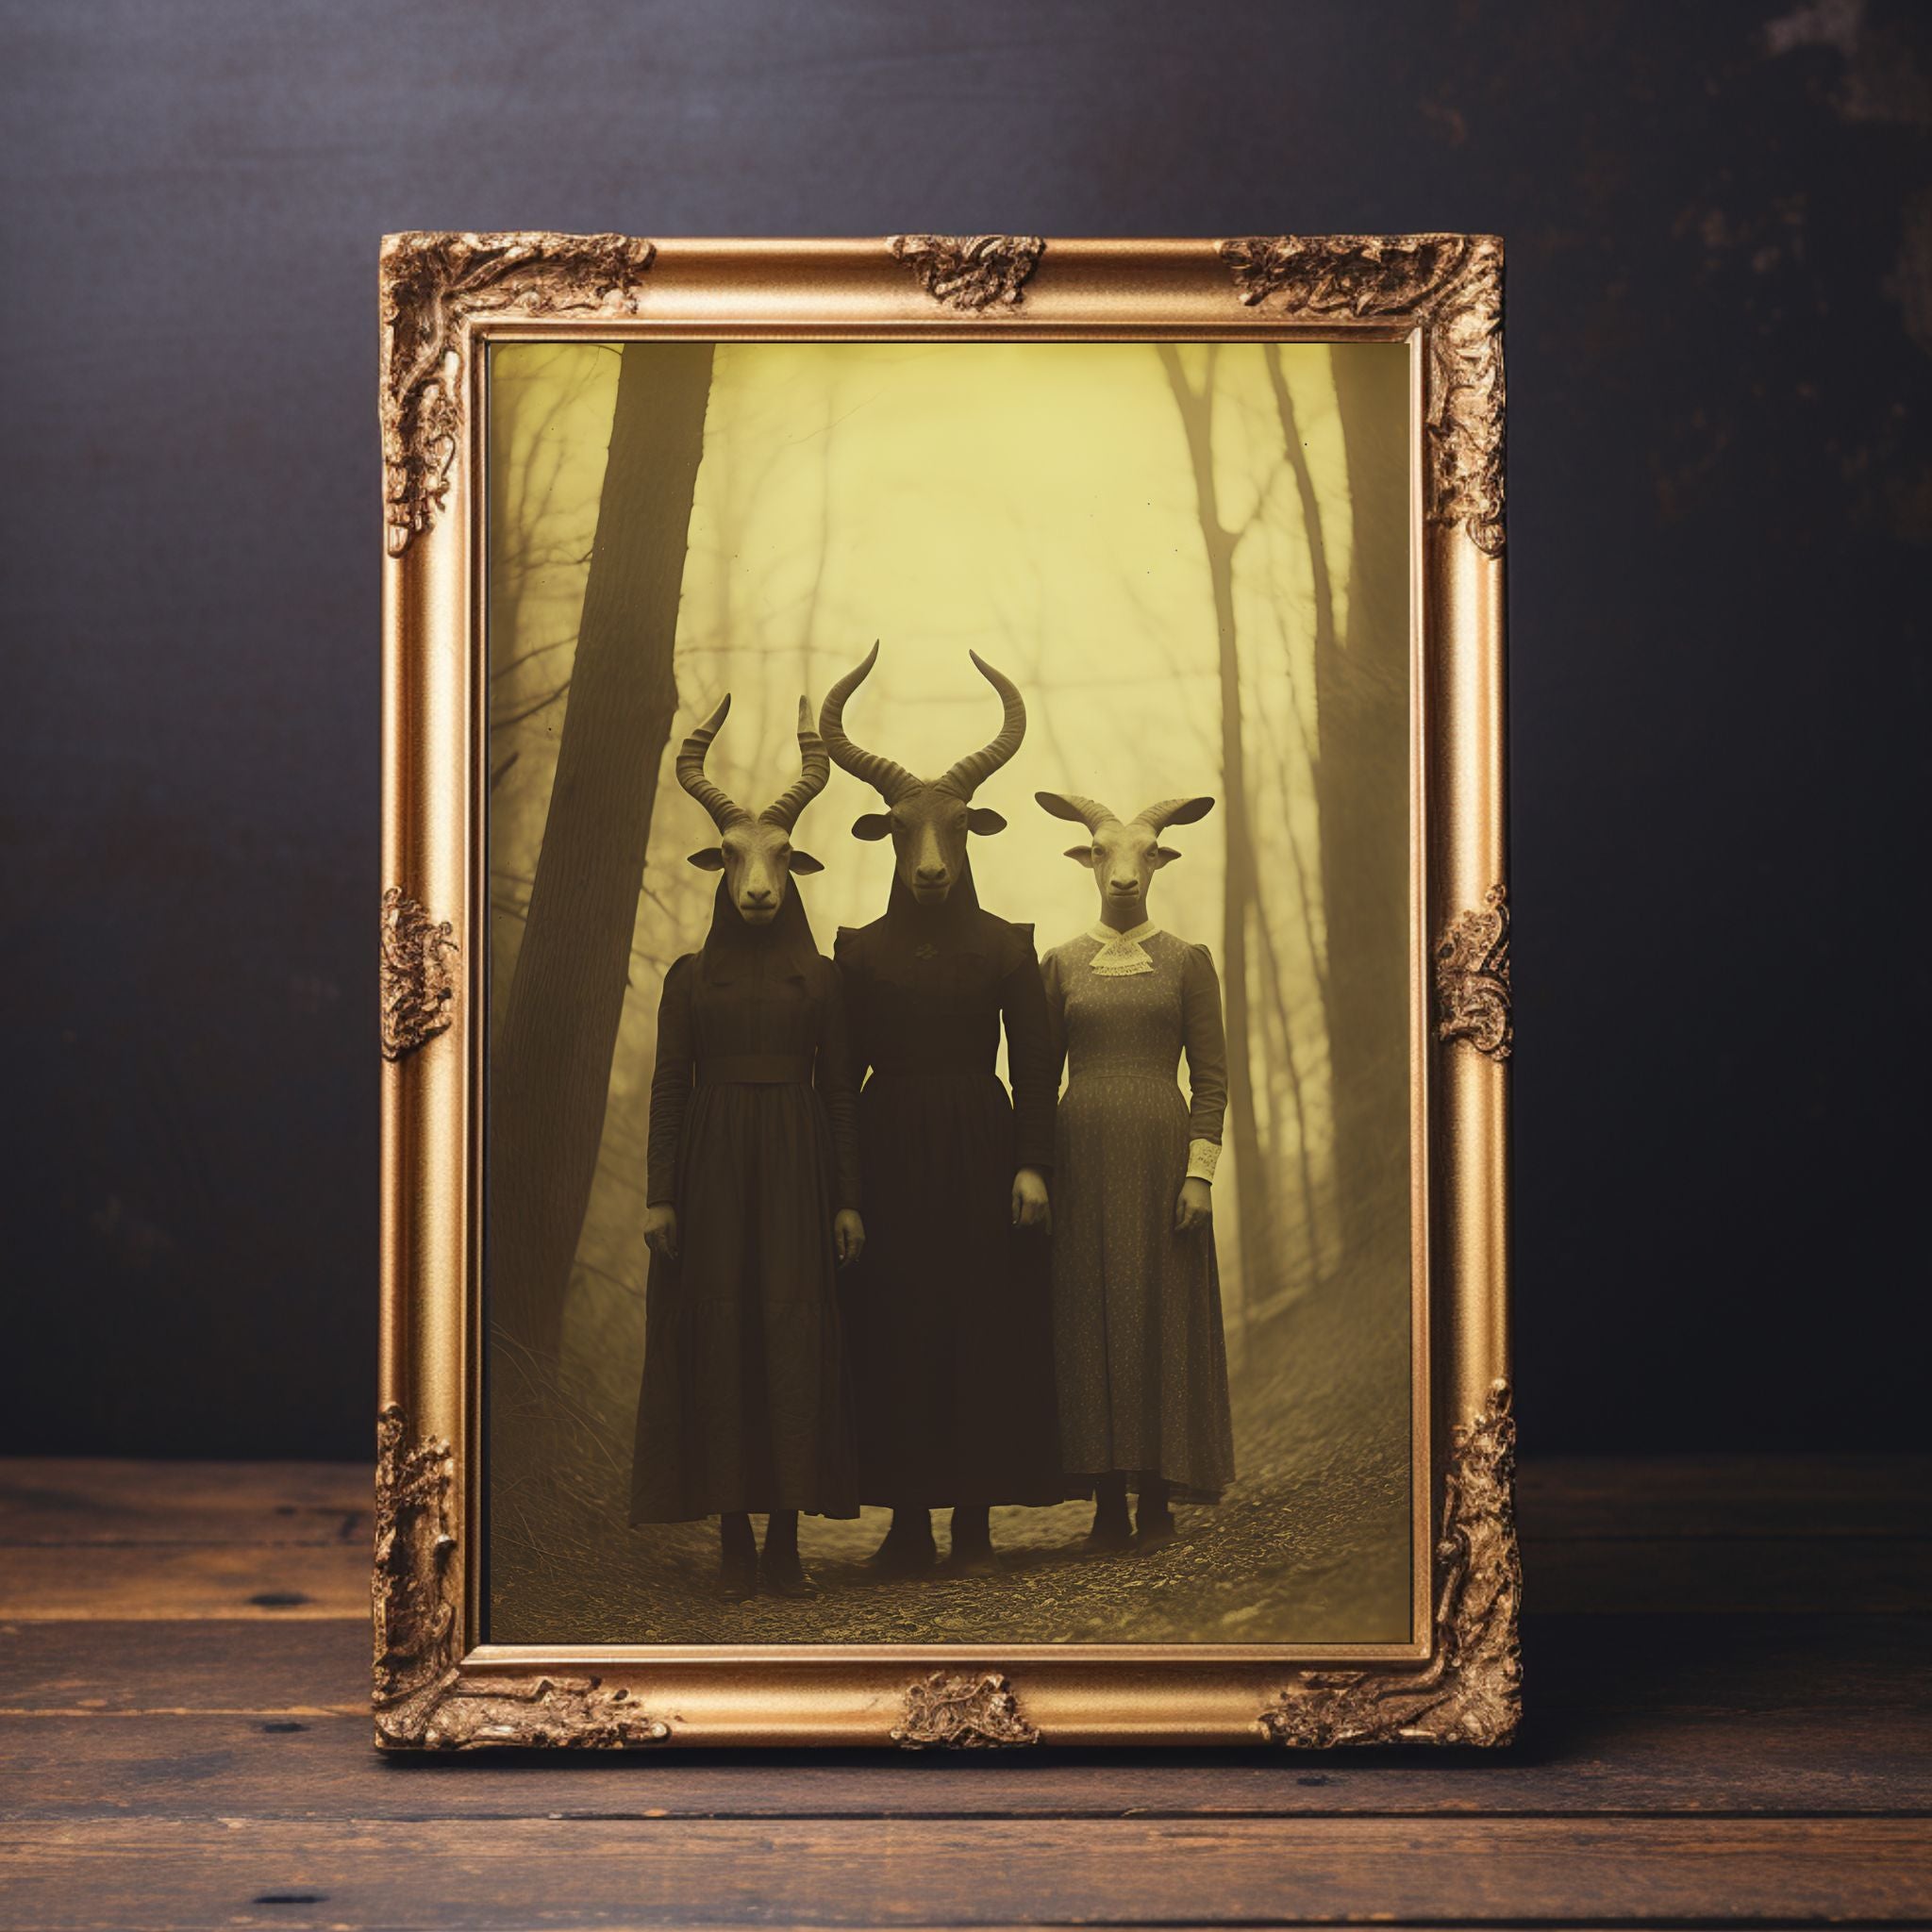 Baphomet Cult in the Woods Vintage Photography Art Poster